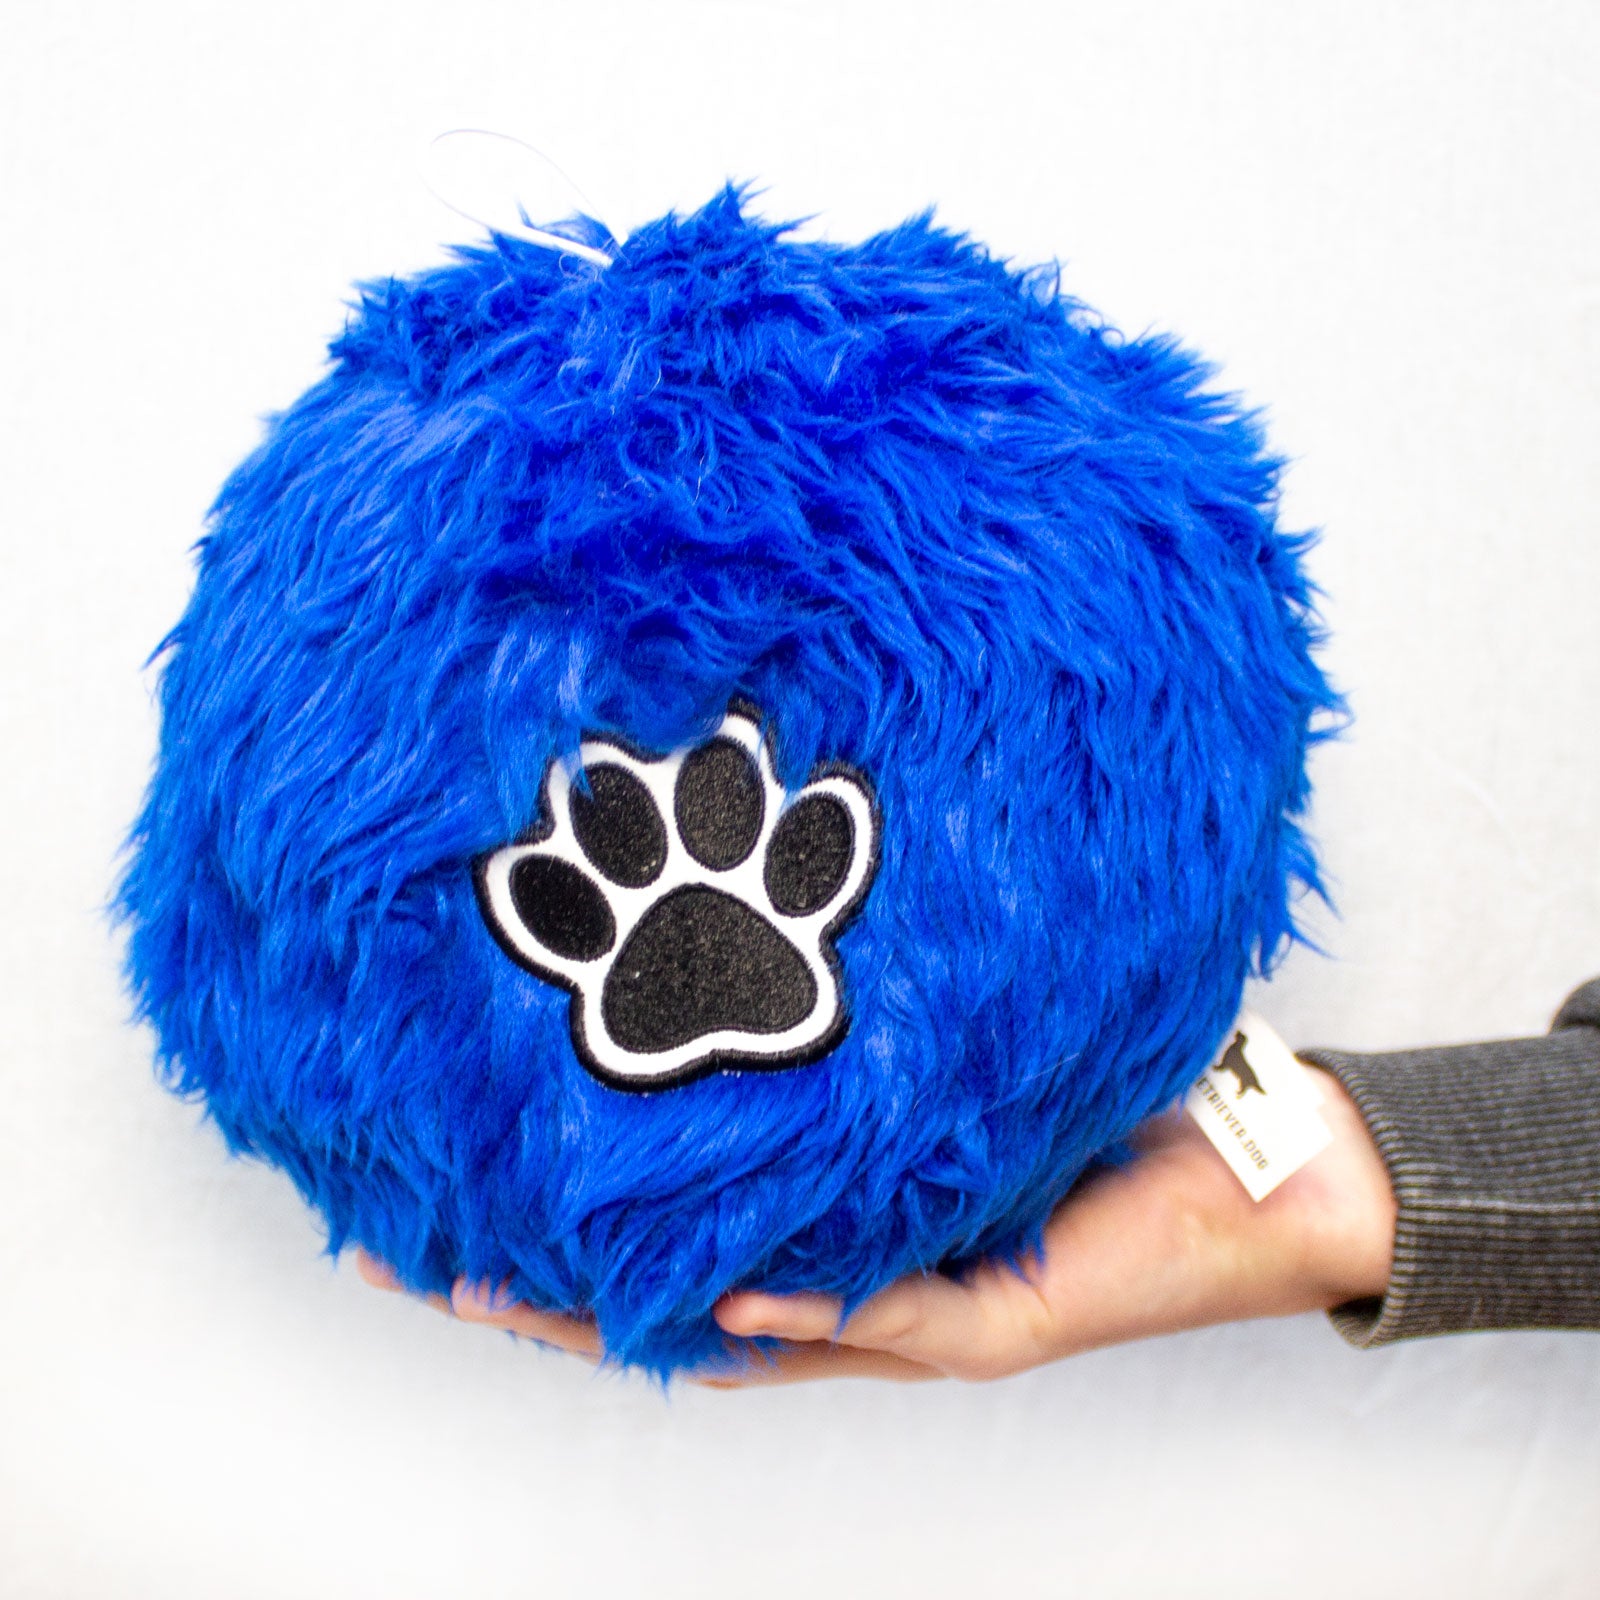 Soft Fluffy Ball For Labrador Dogs - Large Size